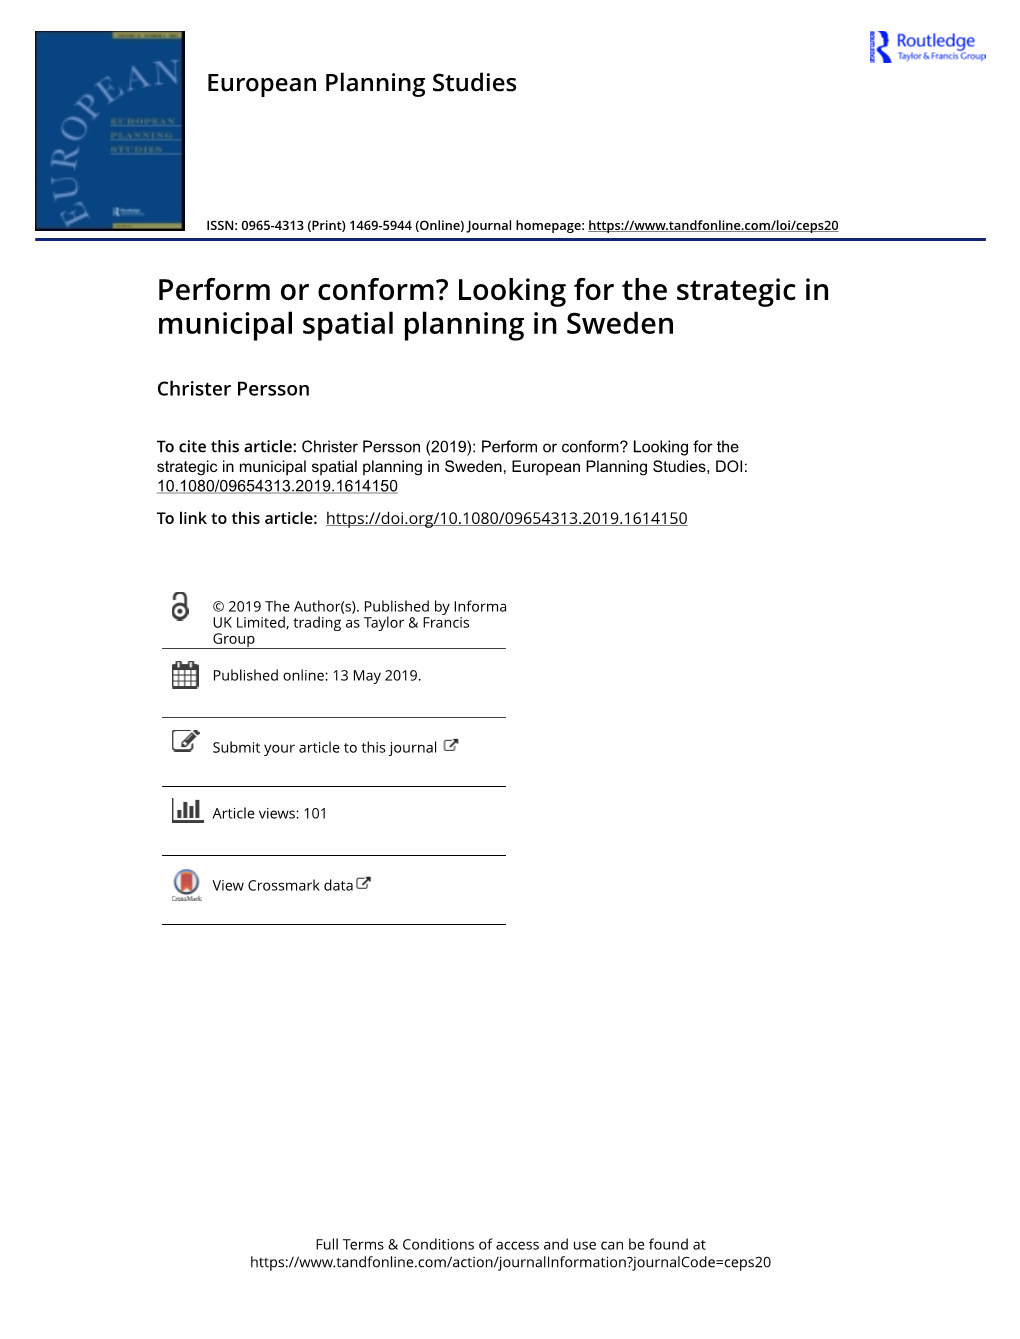 Perform Or Conform? Looking for the Strategic in Municipal Spatial Planning in Sweden